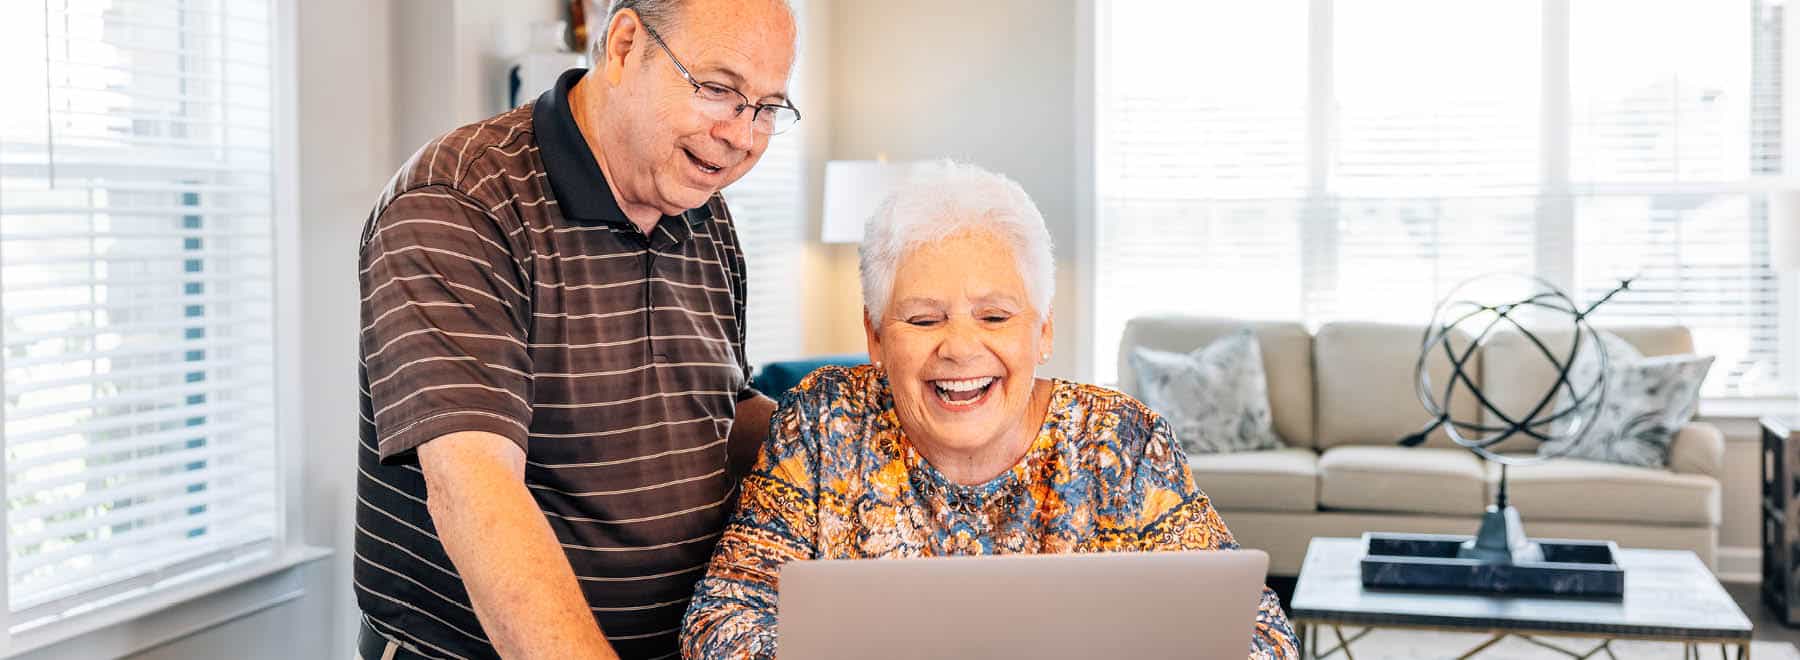 Smiling couple looking at a laptop computer in their apartment